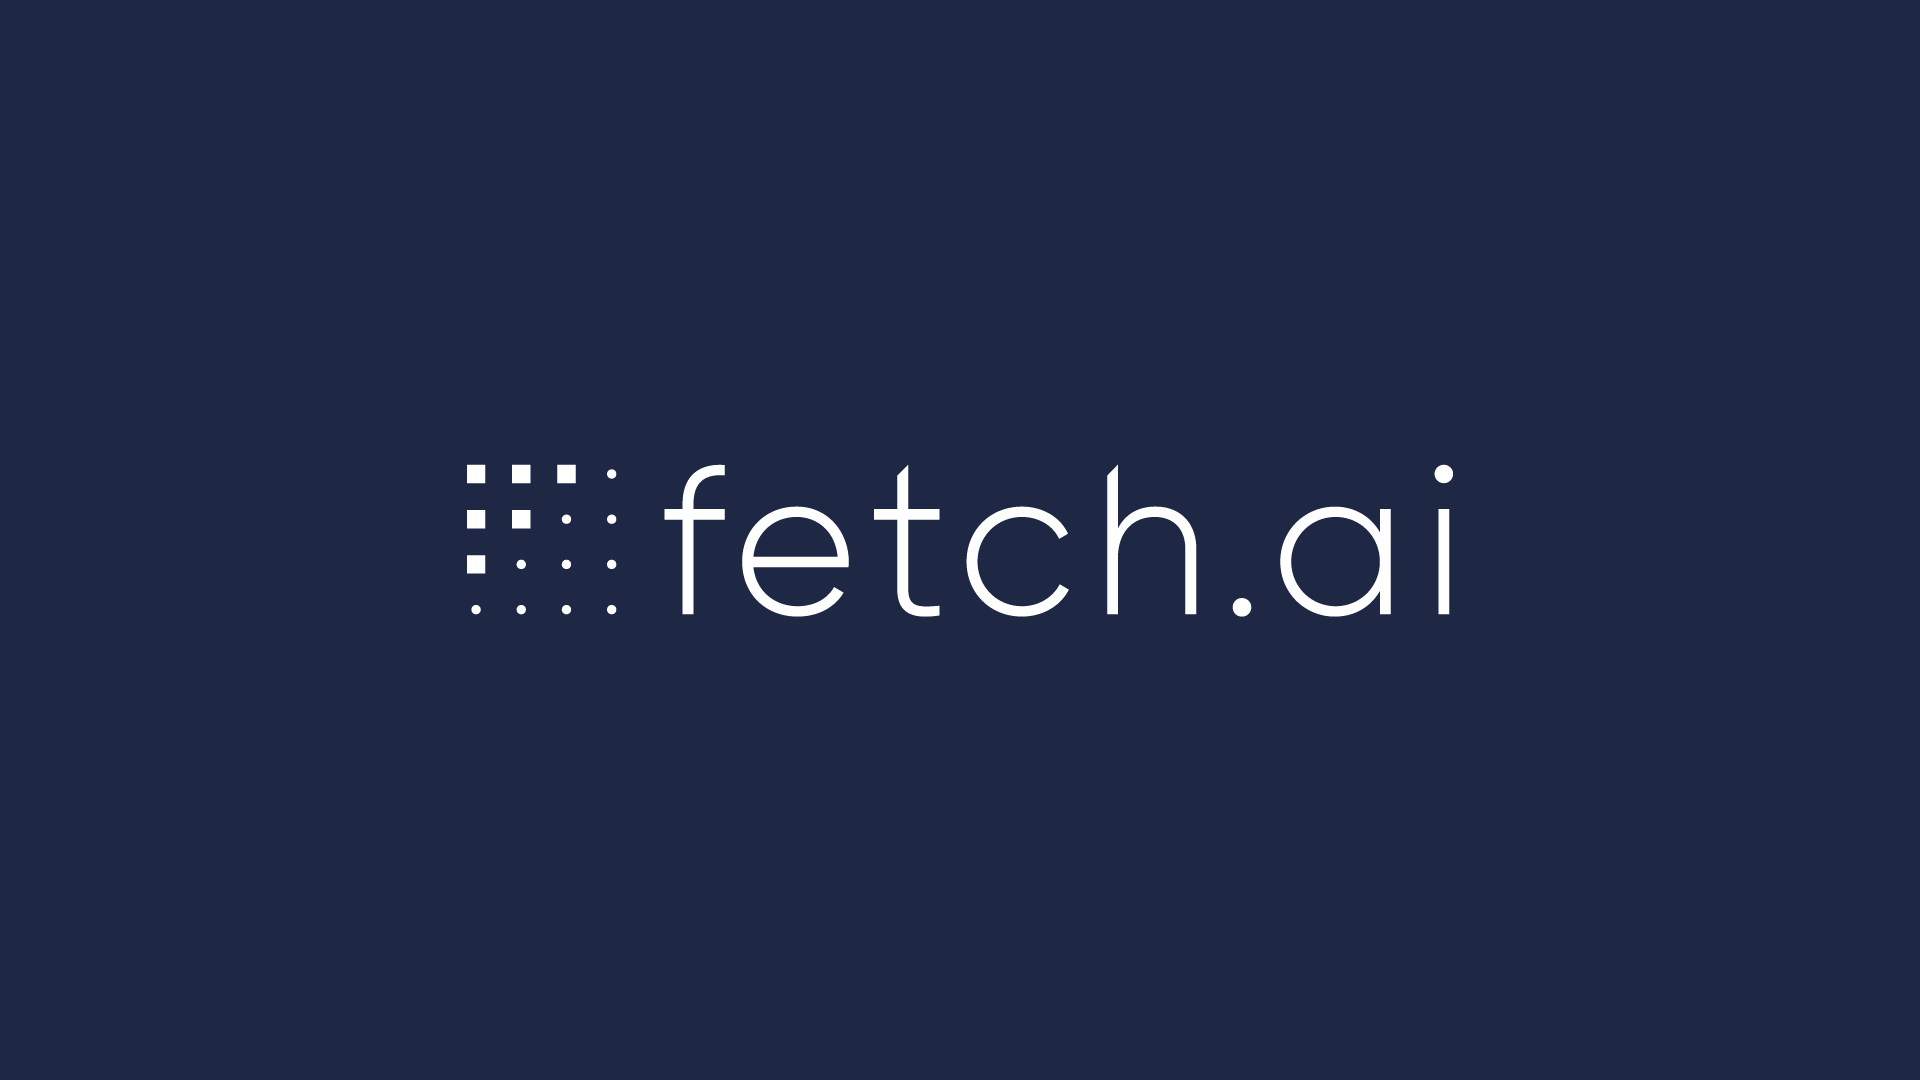 Fetch.ai (FET) Bounces Back: Analyst Eyes $3 to $5 Price Targets